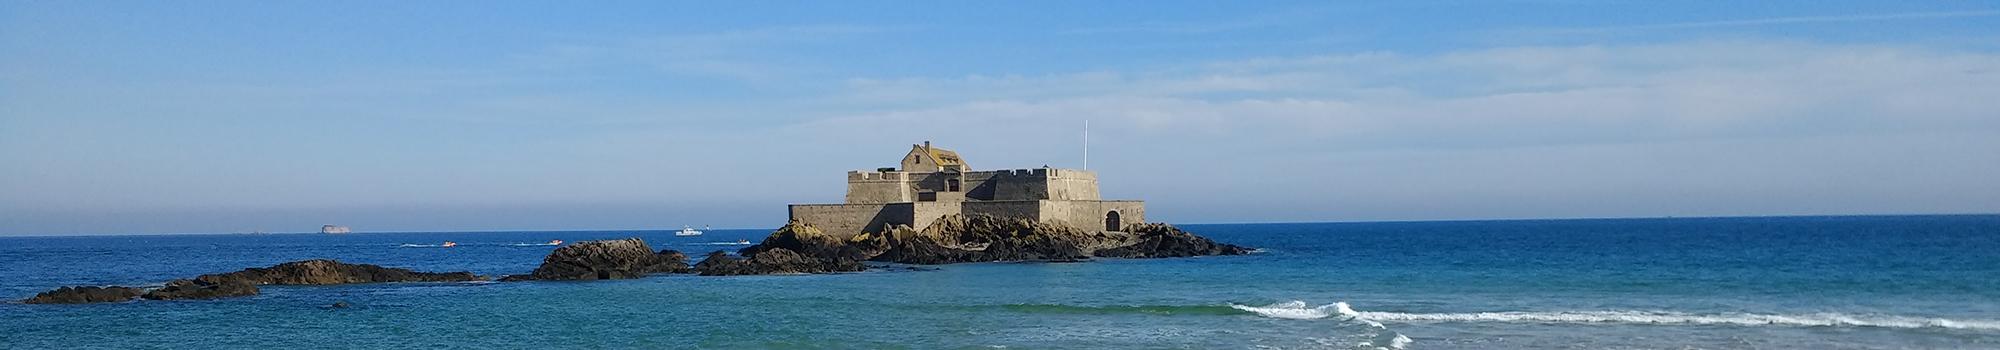 Fort national in St malo